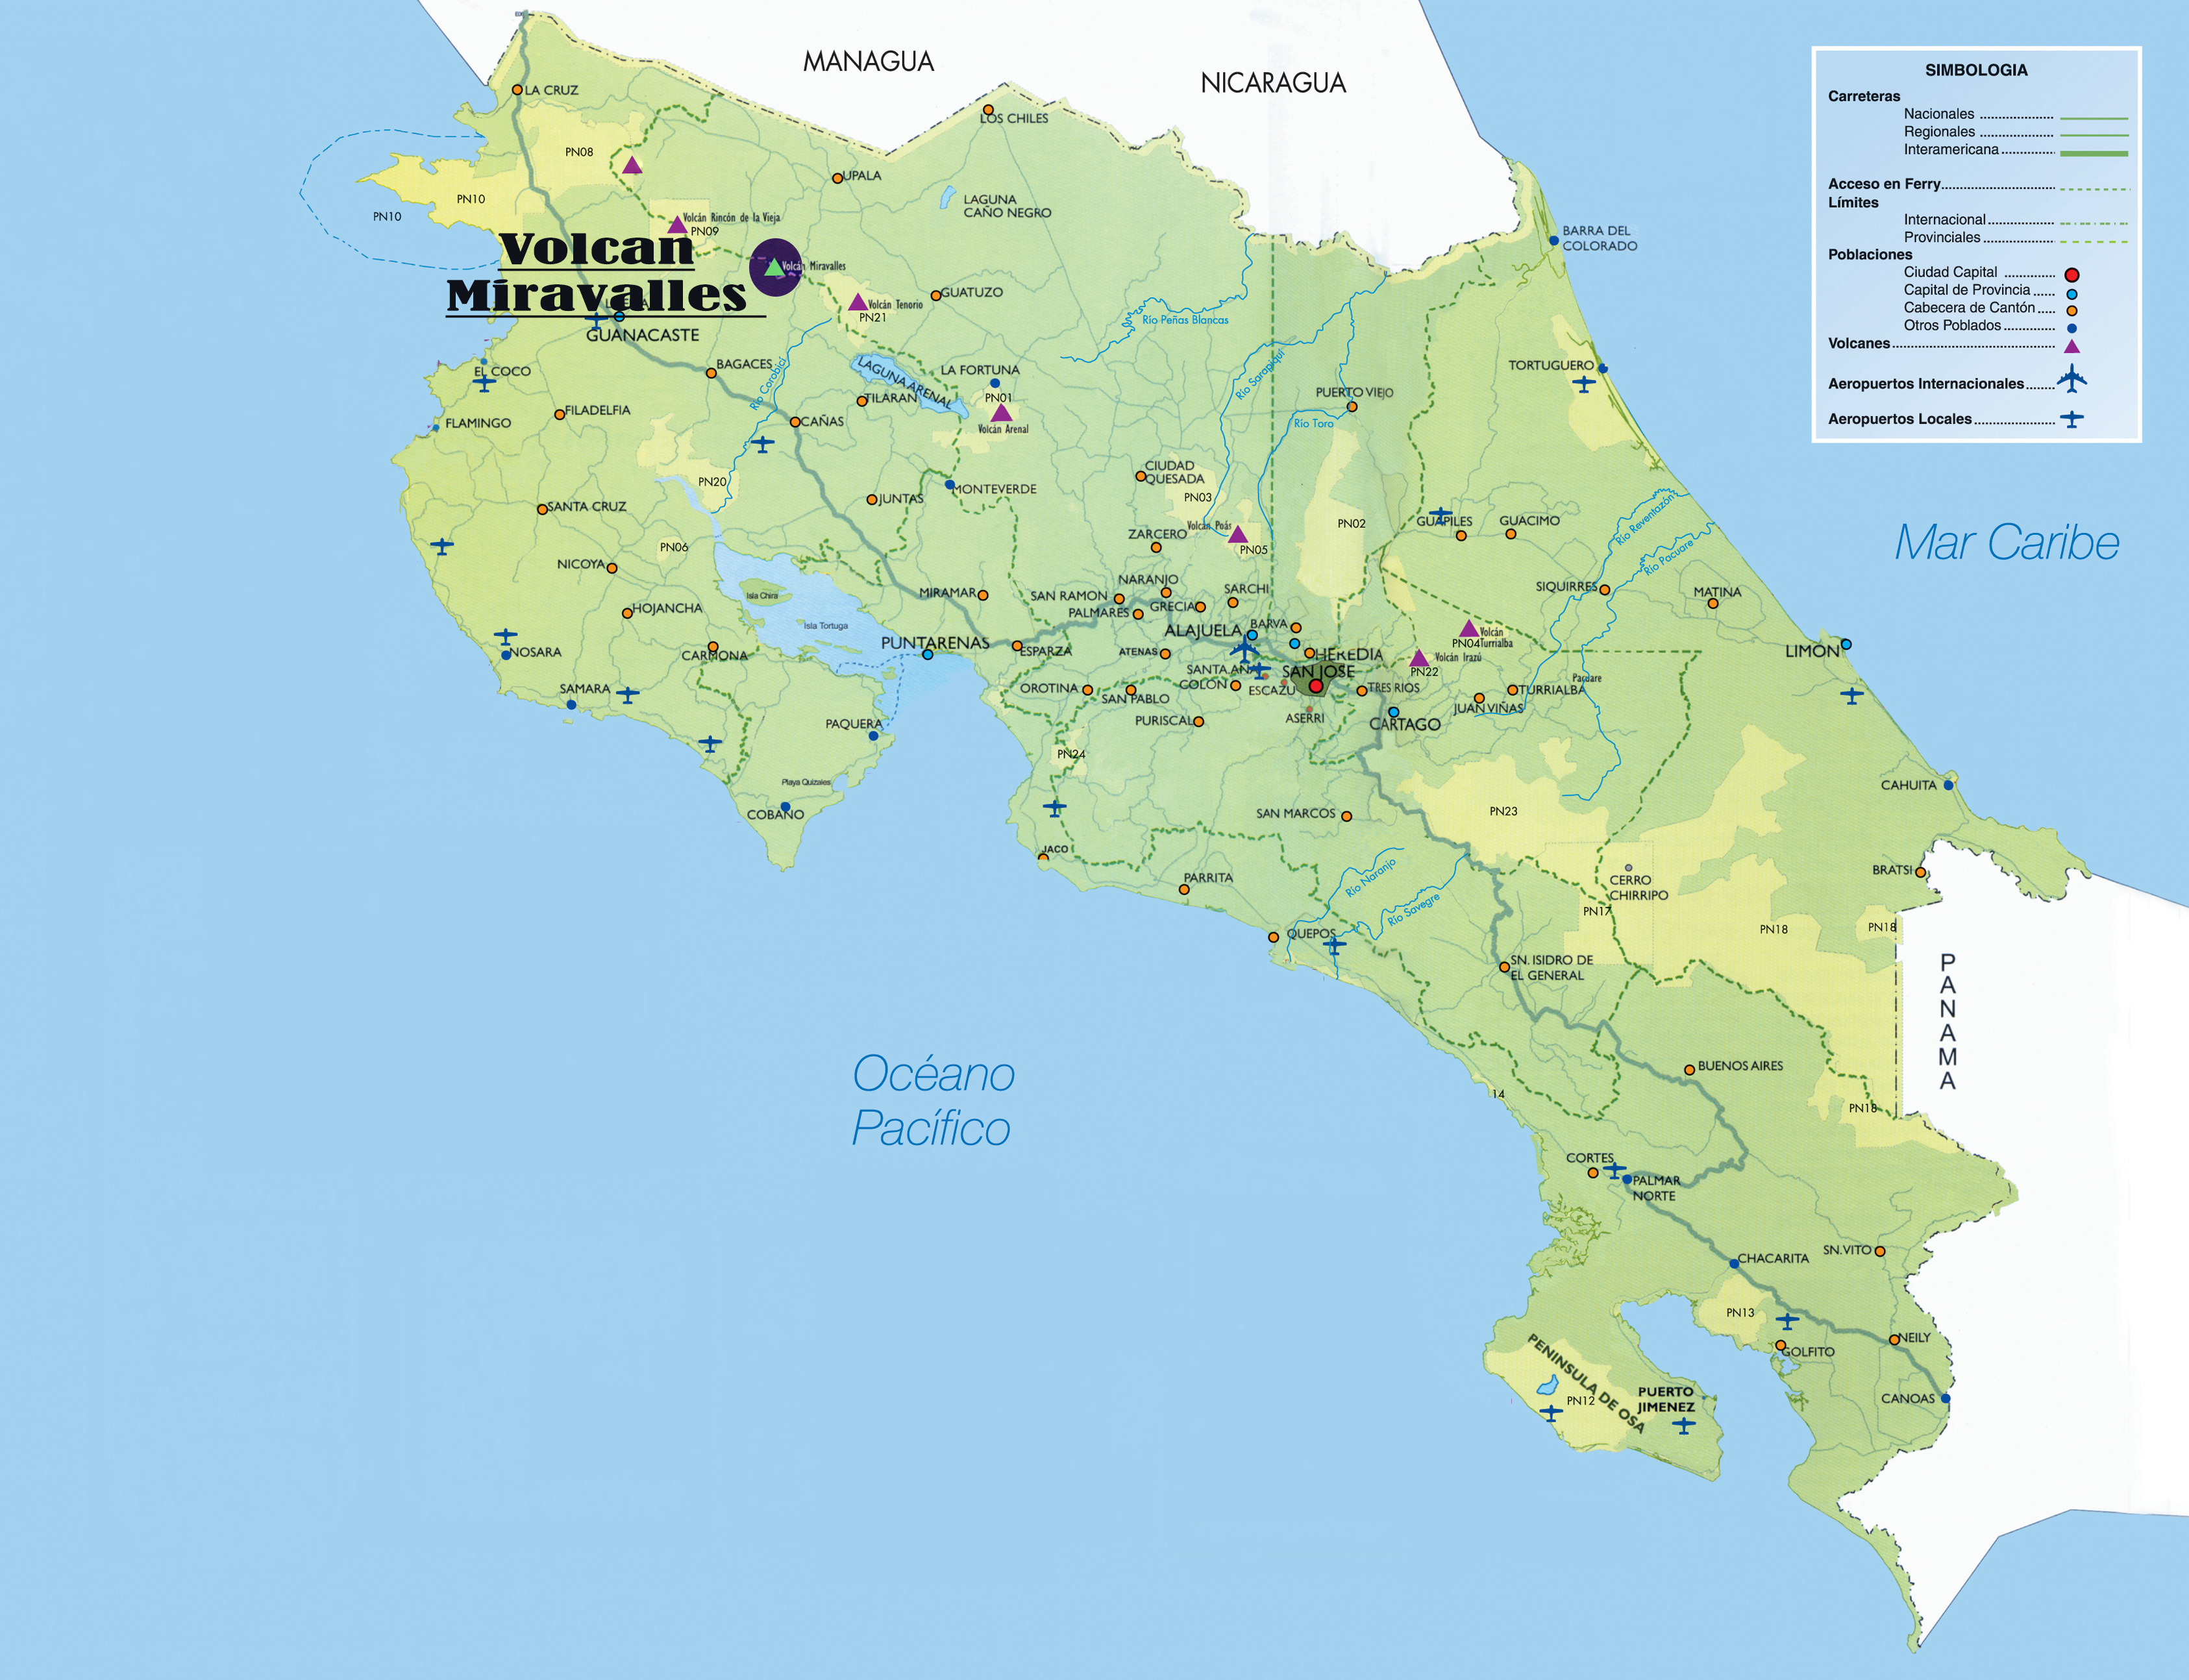 Map showing the location of Miravalles Volcano in Costa Rica